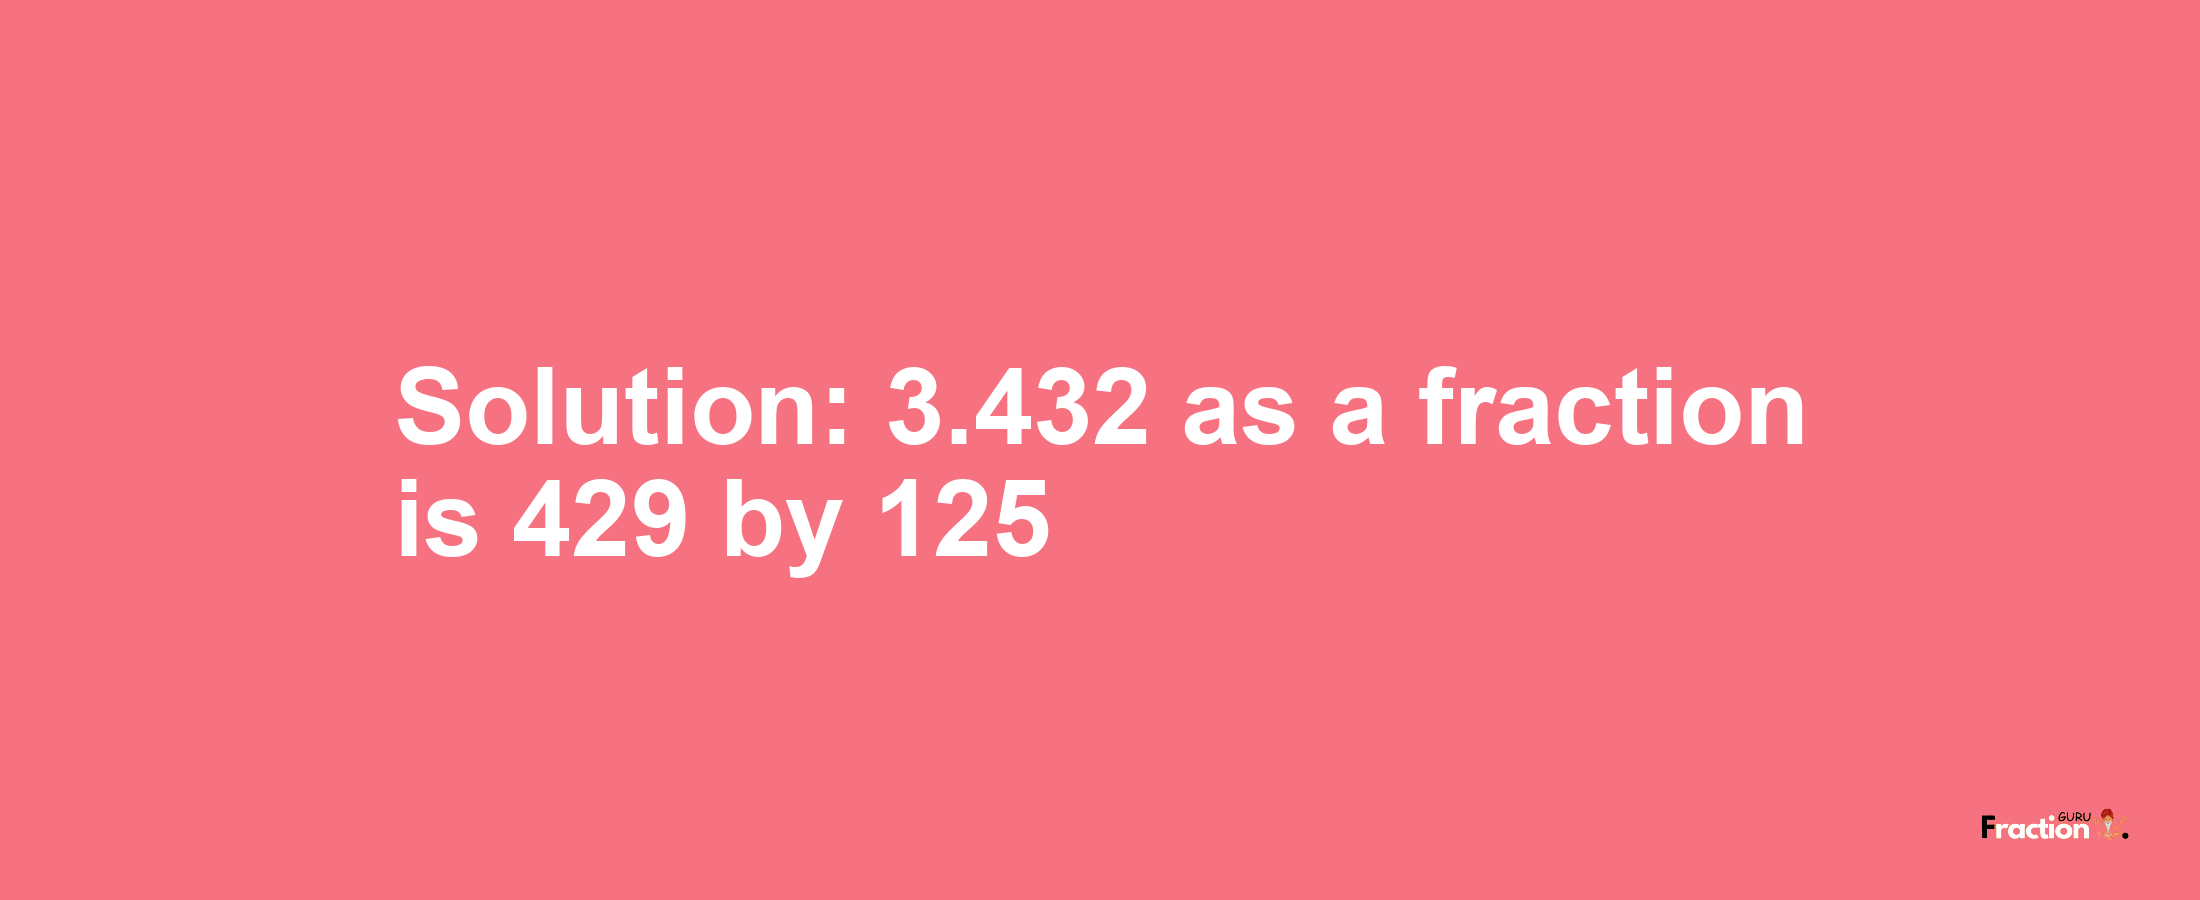 Solution:3.432 as a fraction is 429/125